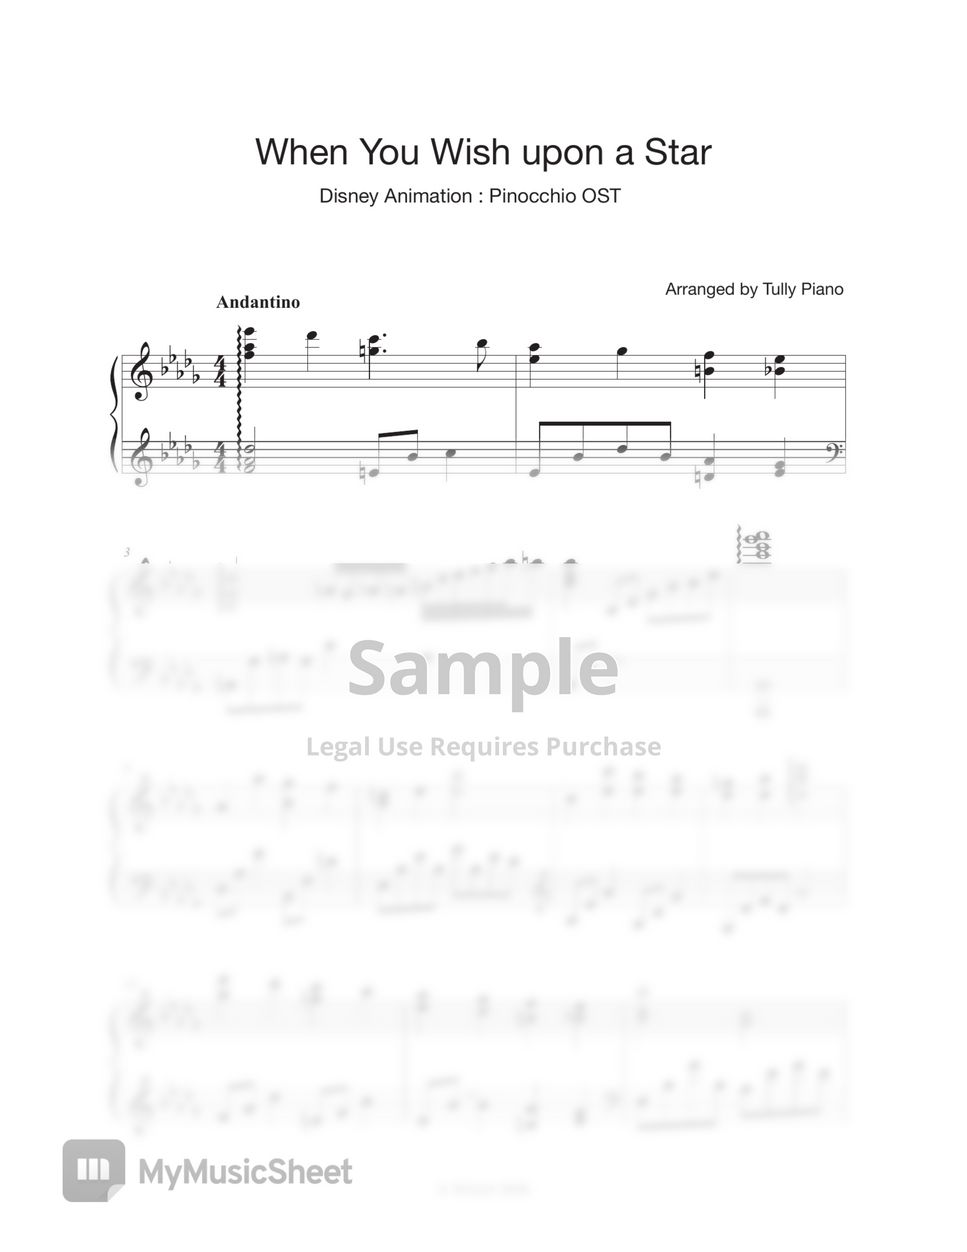 Disney animation ‘Pinocchio’ Ost. - When You Wish upon a Star (3 Sheet Music) by Tully Piano